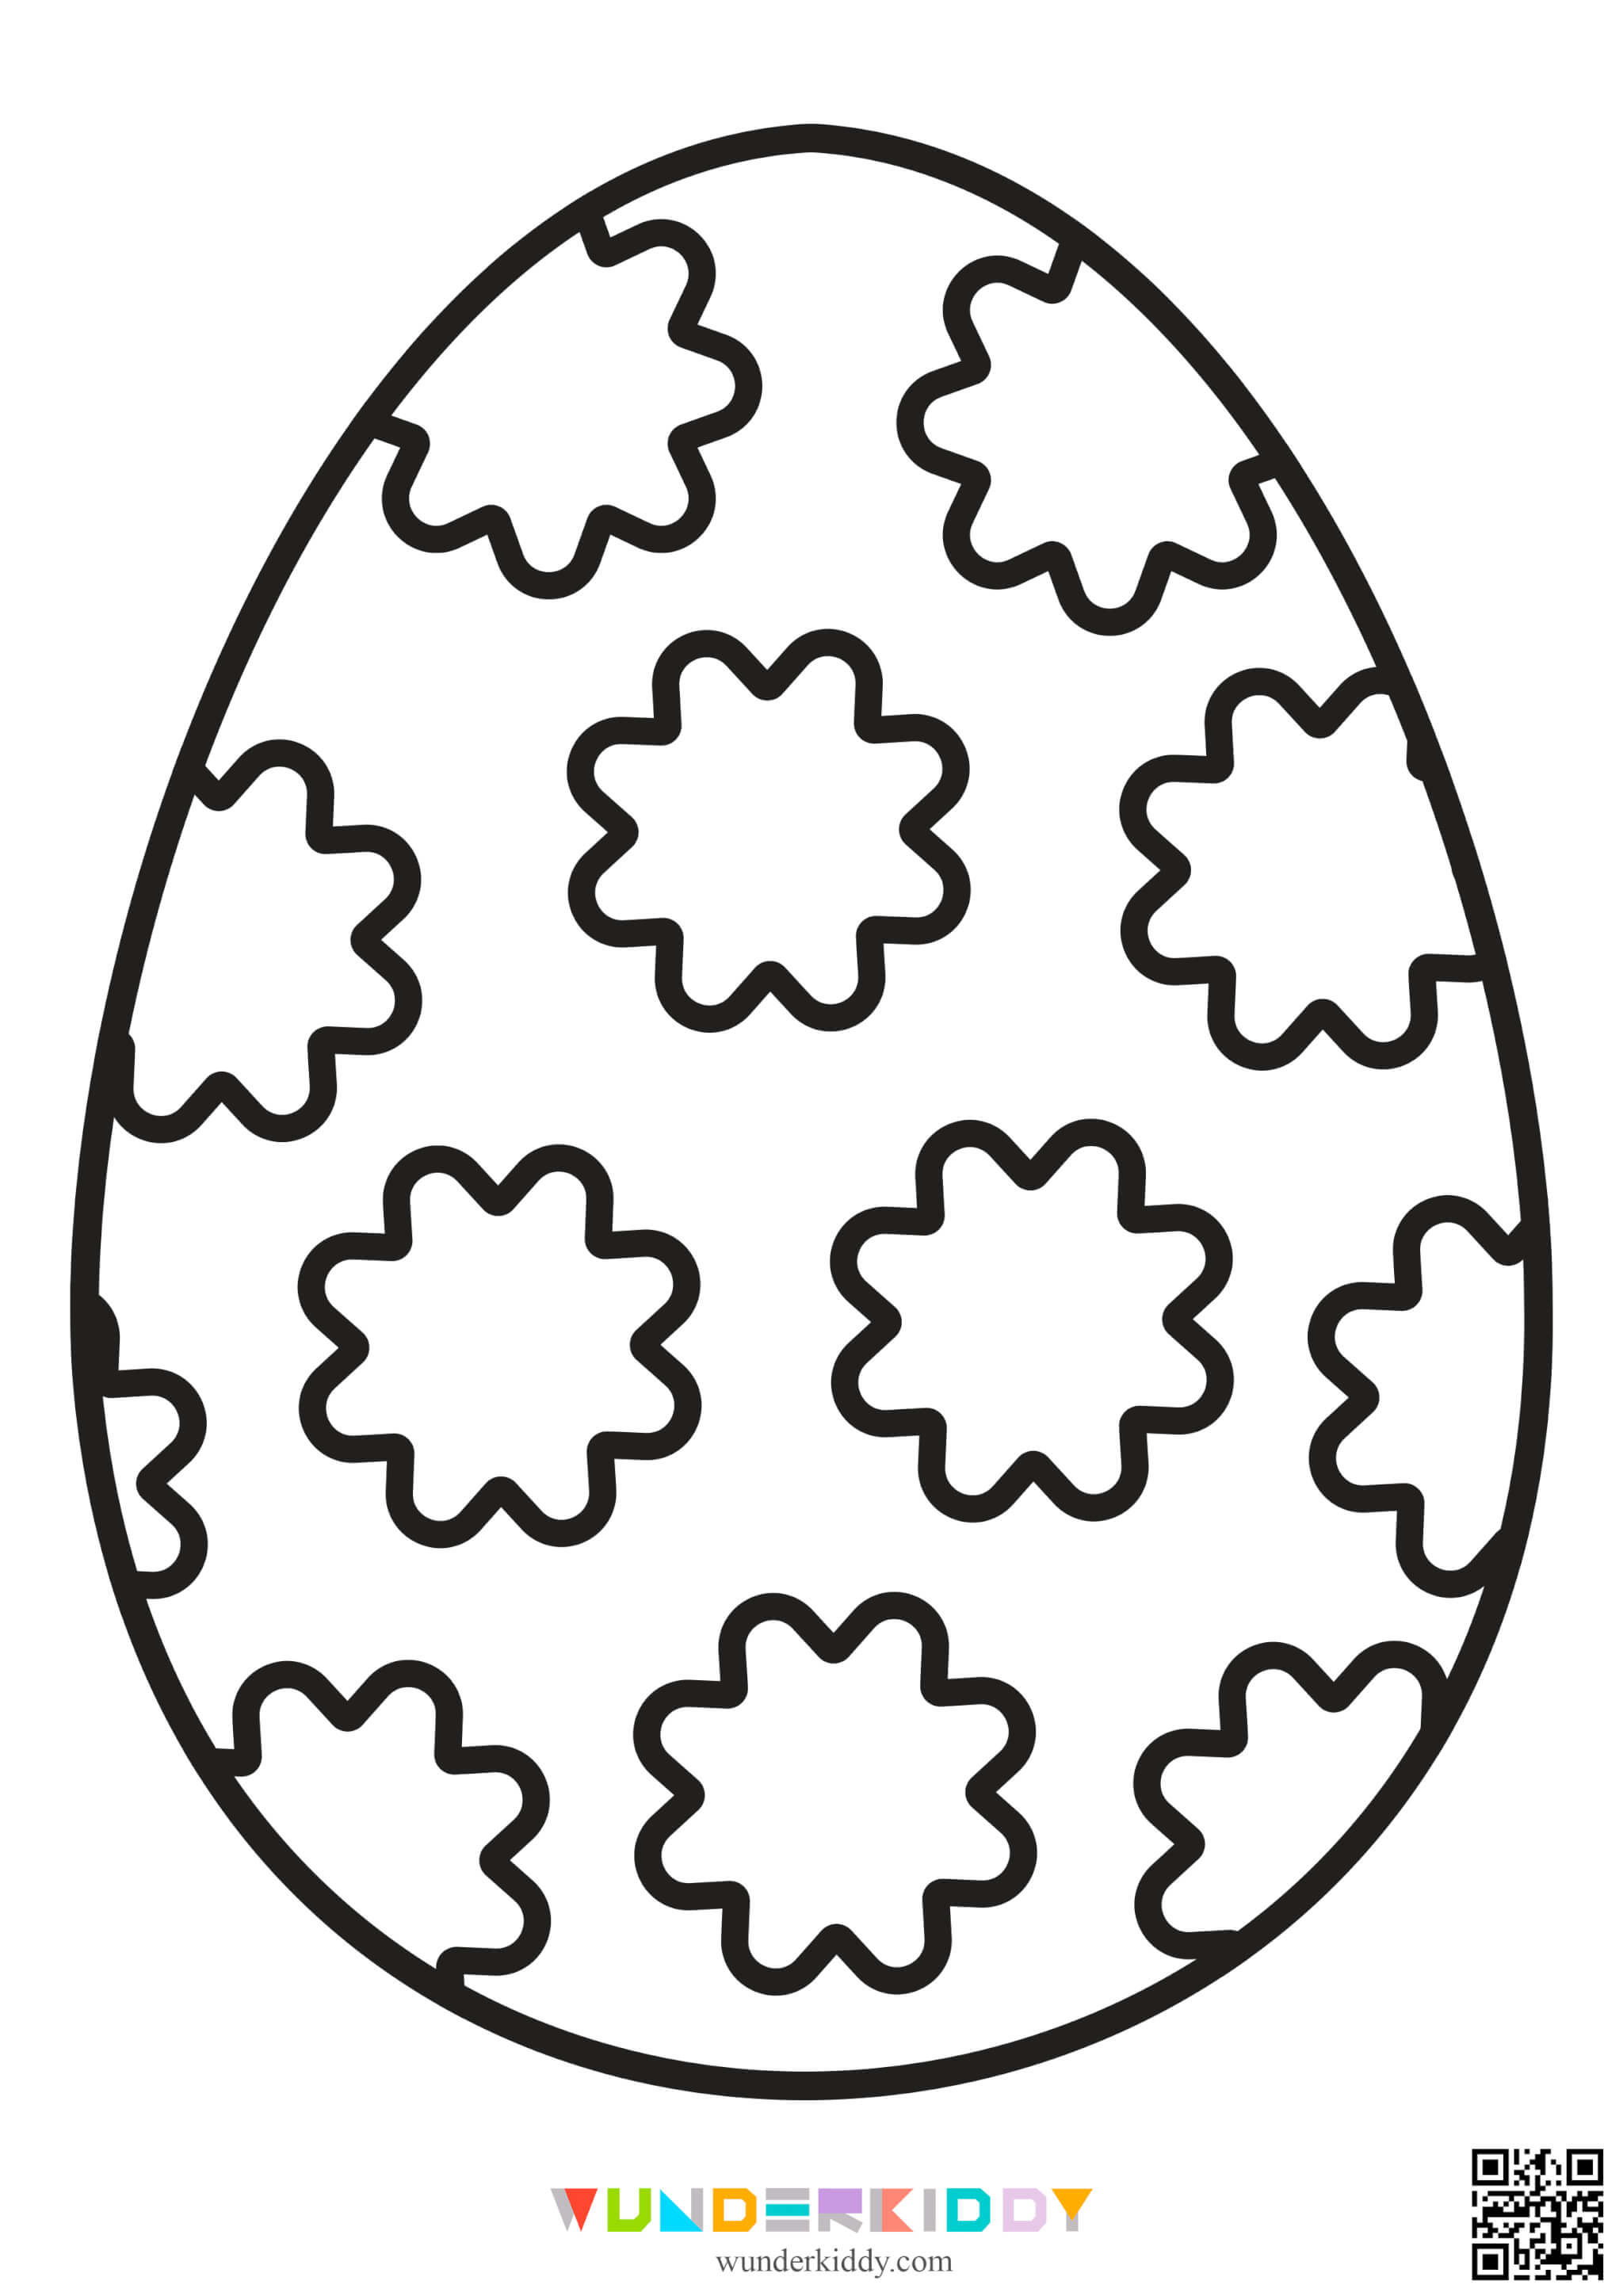 Printable Easter Egg Template and Colouring Page PDF